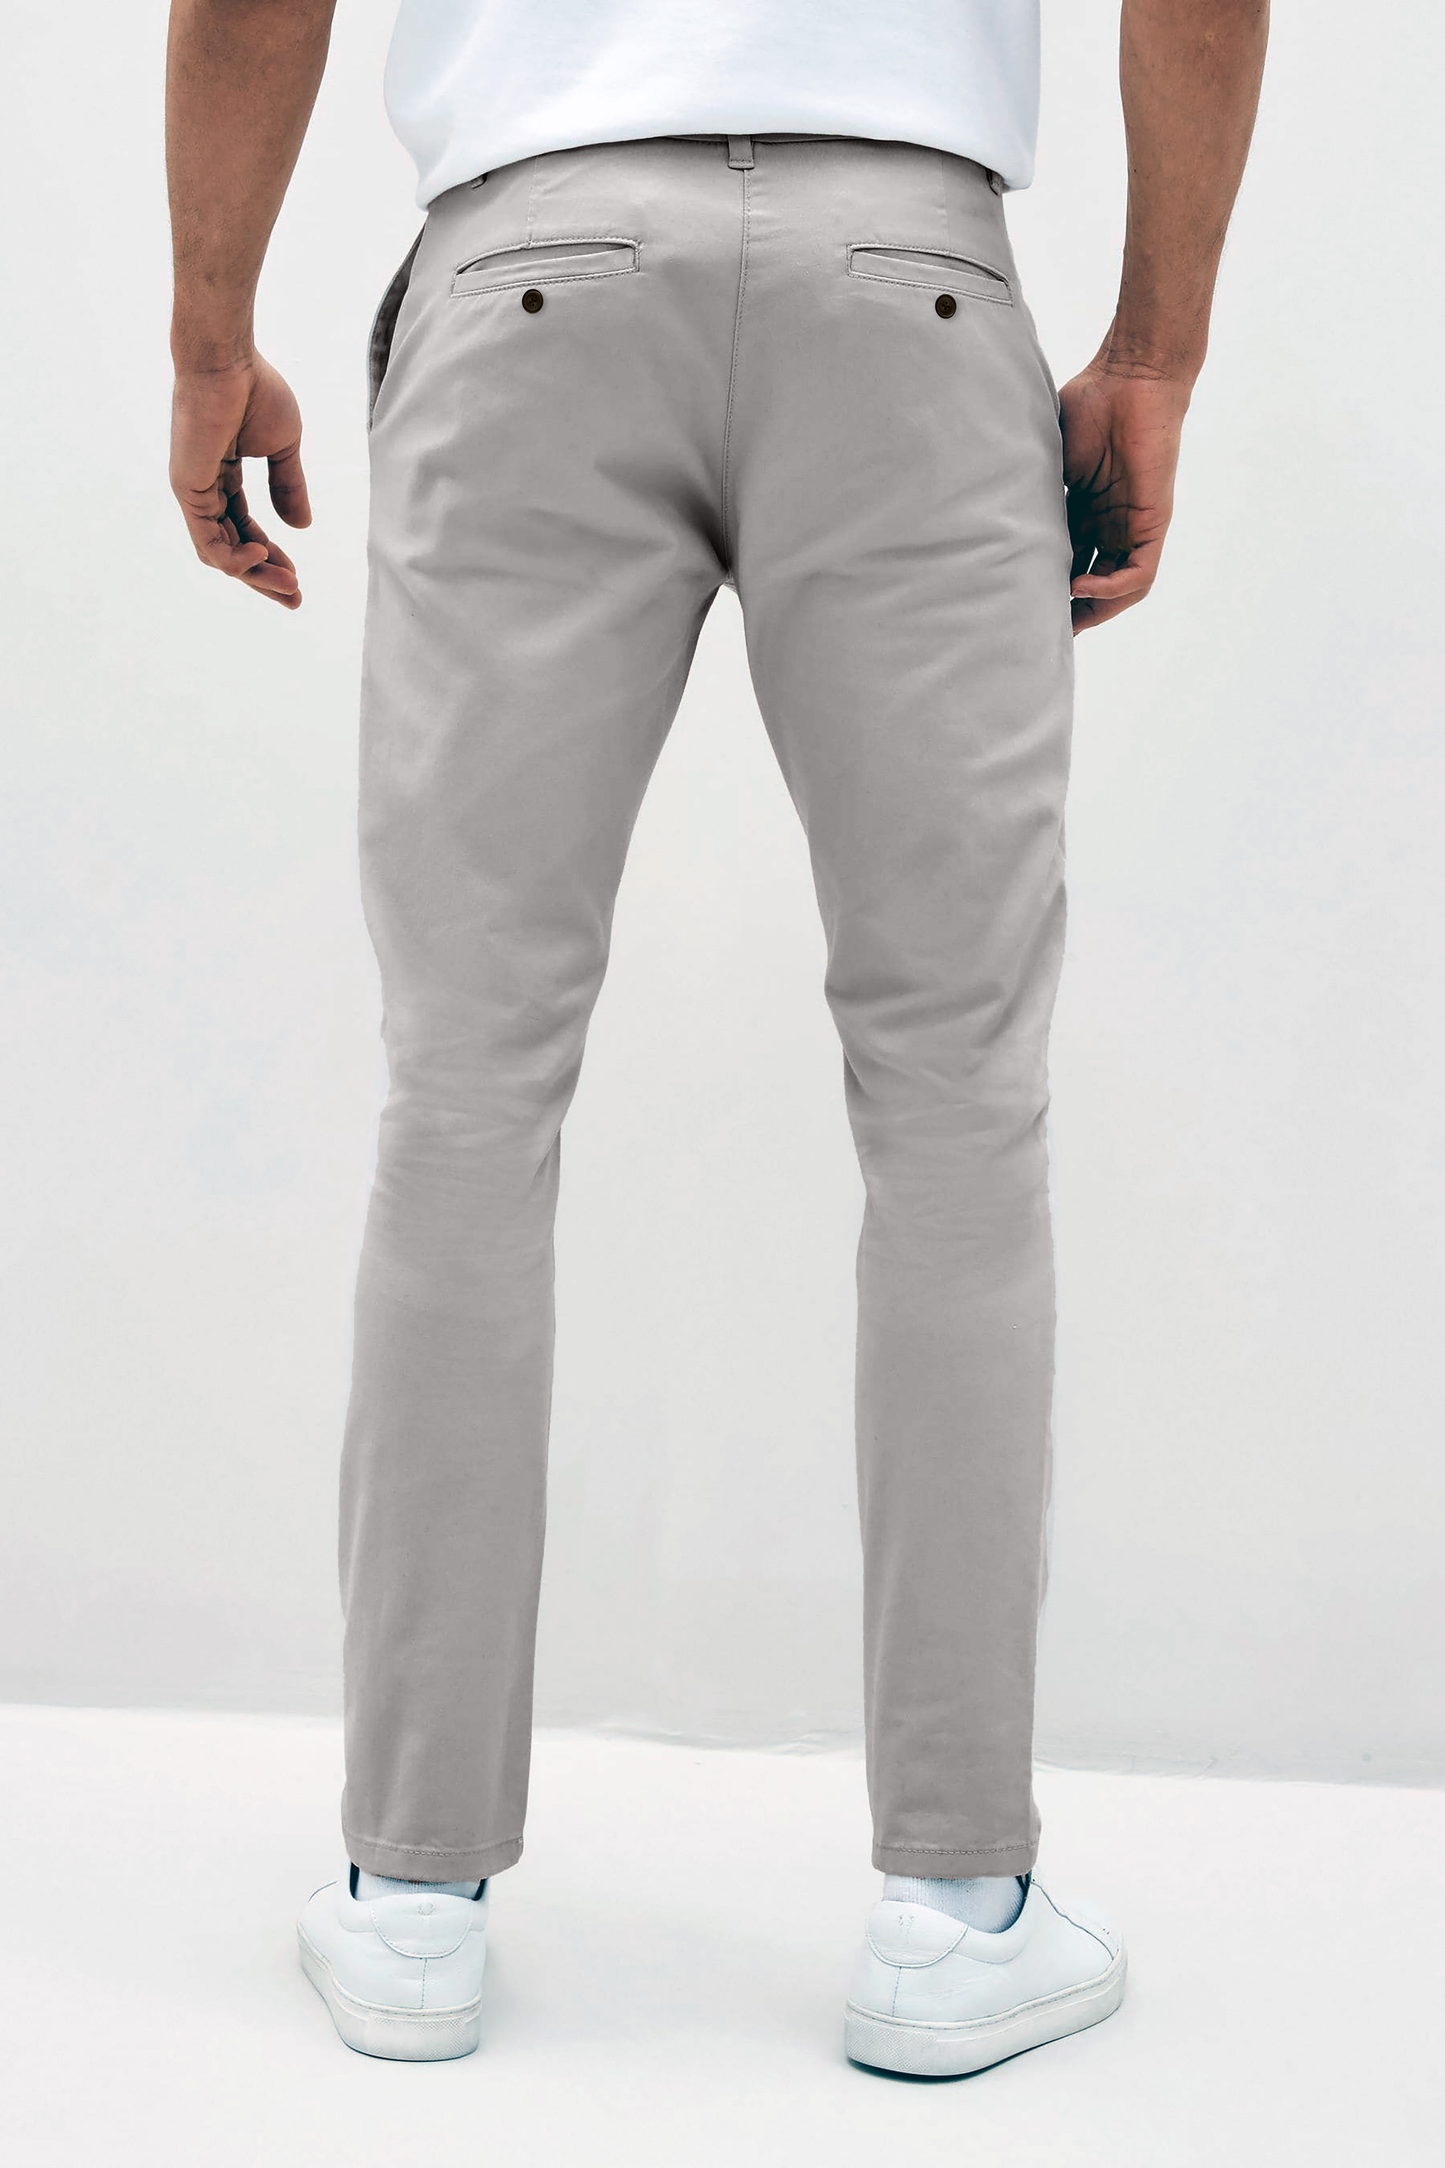 Mens Silver Grey chinos with front slanted pockets, jetted back pockets. zip fly fastening and brown horne buttons on the waistband and back pockets, the fit is a slim fit, this is worn with a white tee and white unbranded trainers